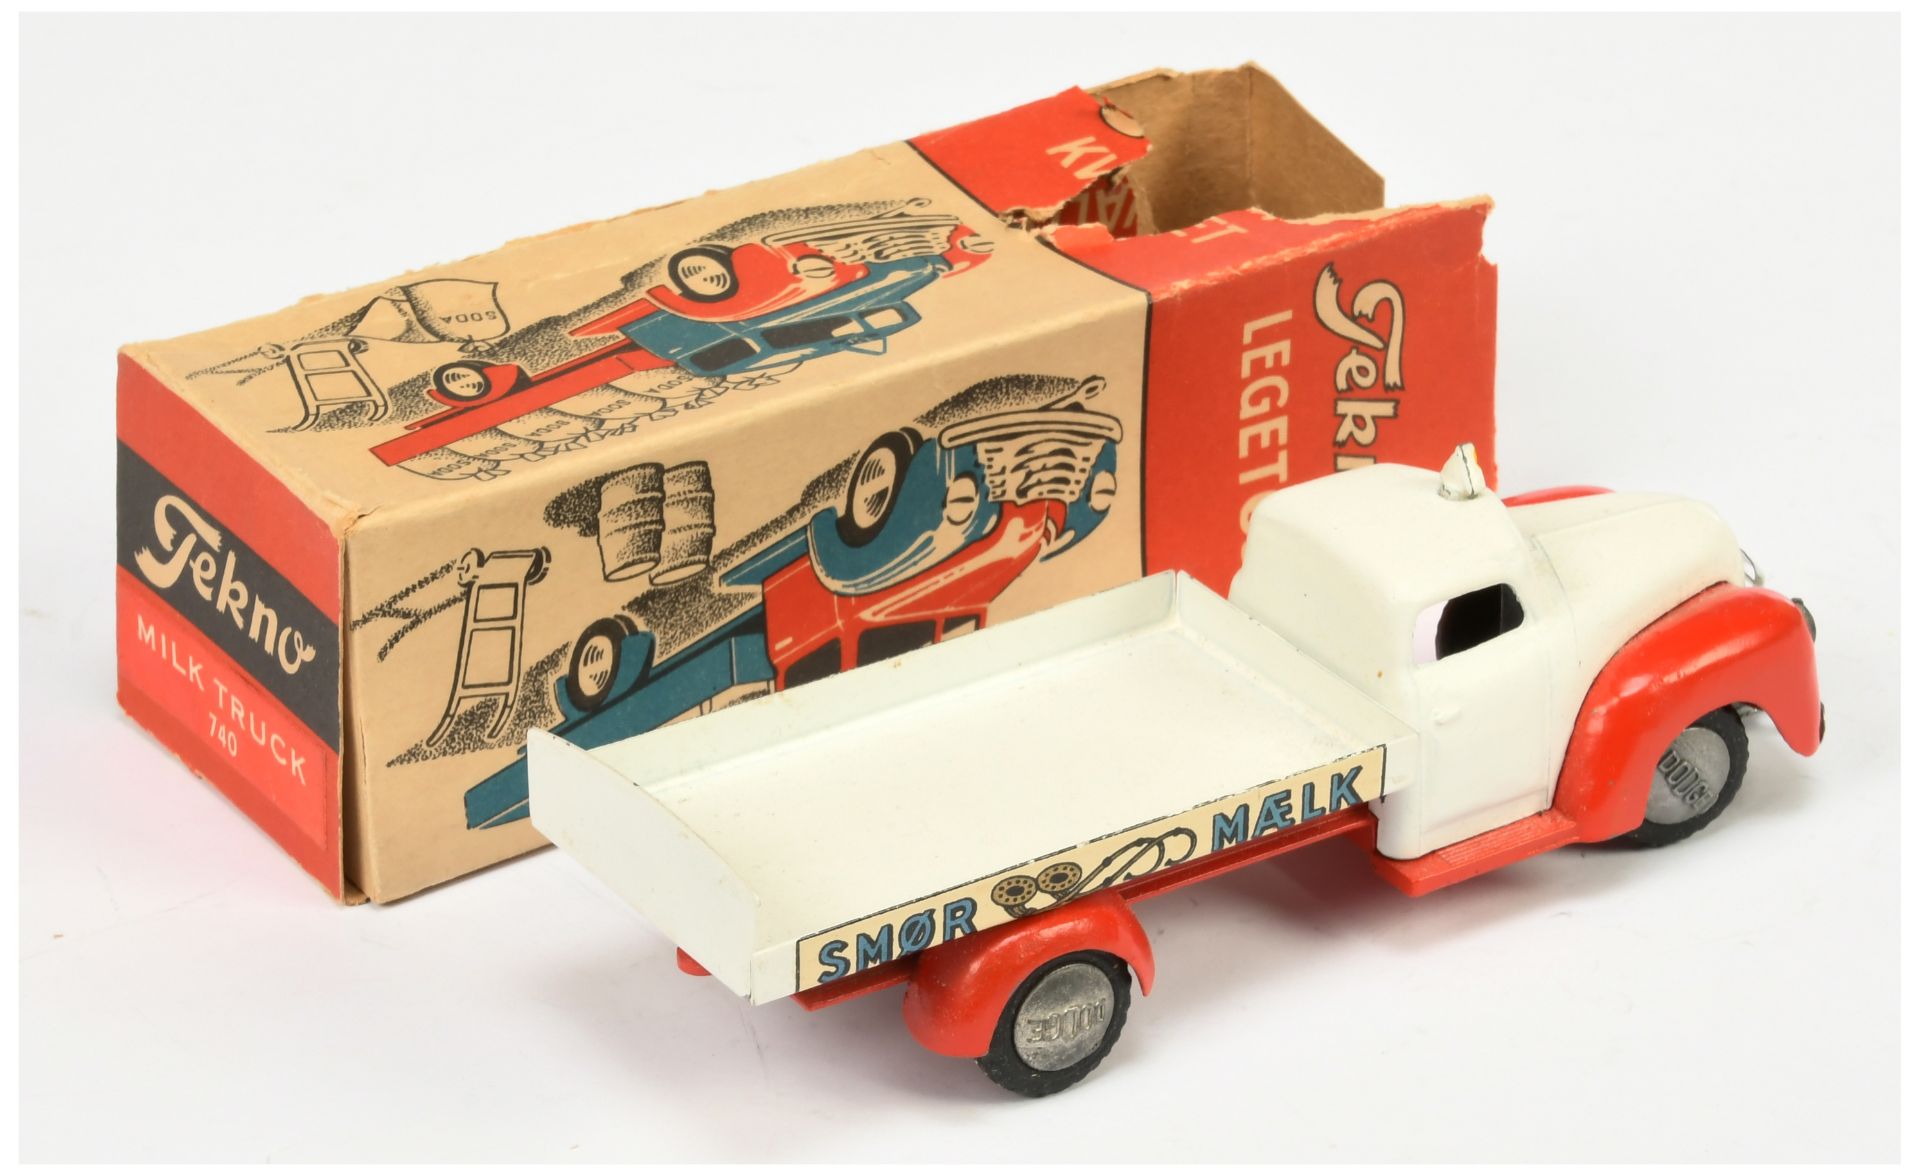 Tekno  Dodge "SMOR Milk"  Delivery Truck - White and red, chrome trim - Good Plus bright example ... - Image 2 of 2